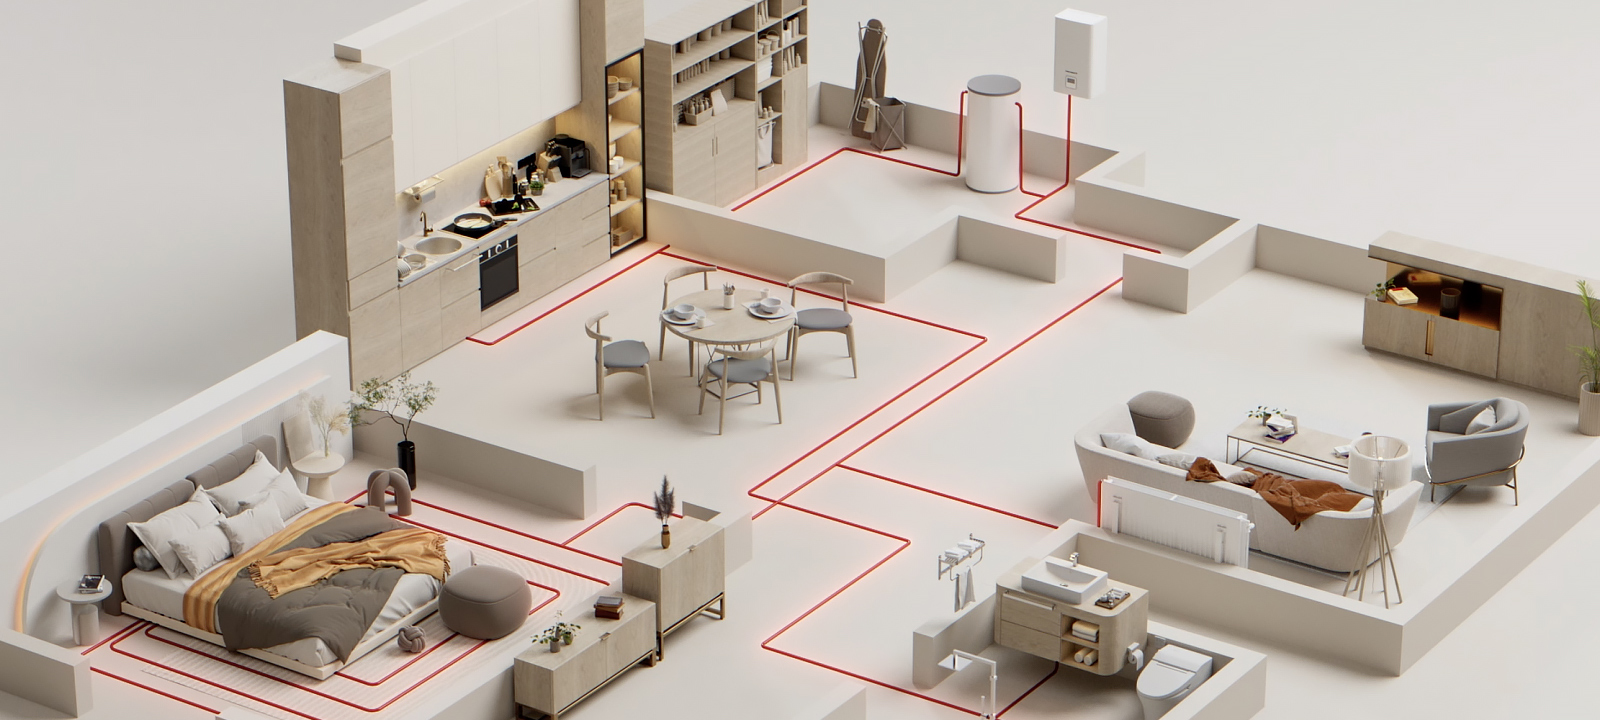 The heat pump system is indicated by a red line on the interior of a house with a bed, table, and sofa drawn in 3d.